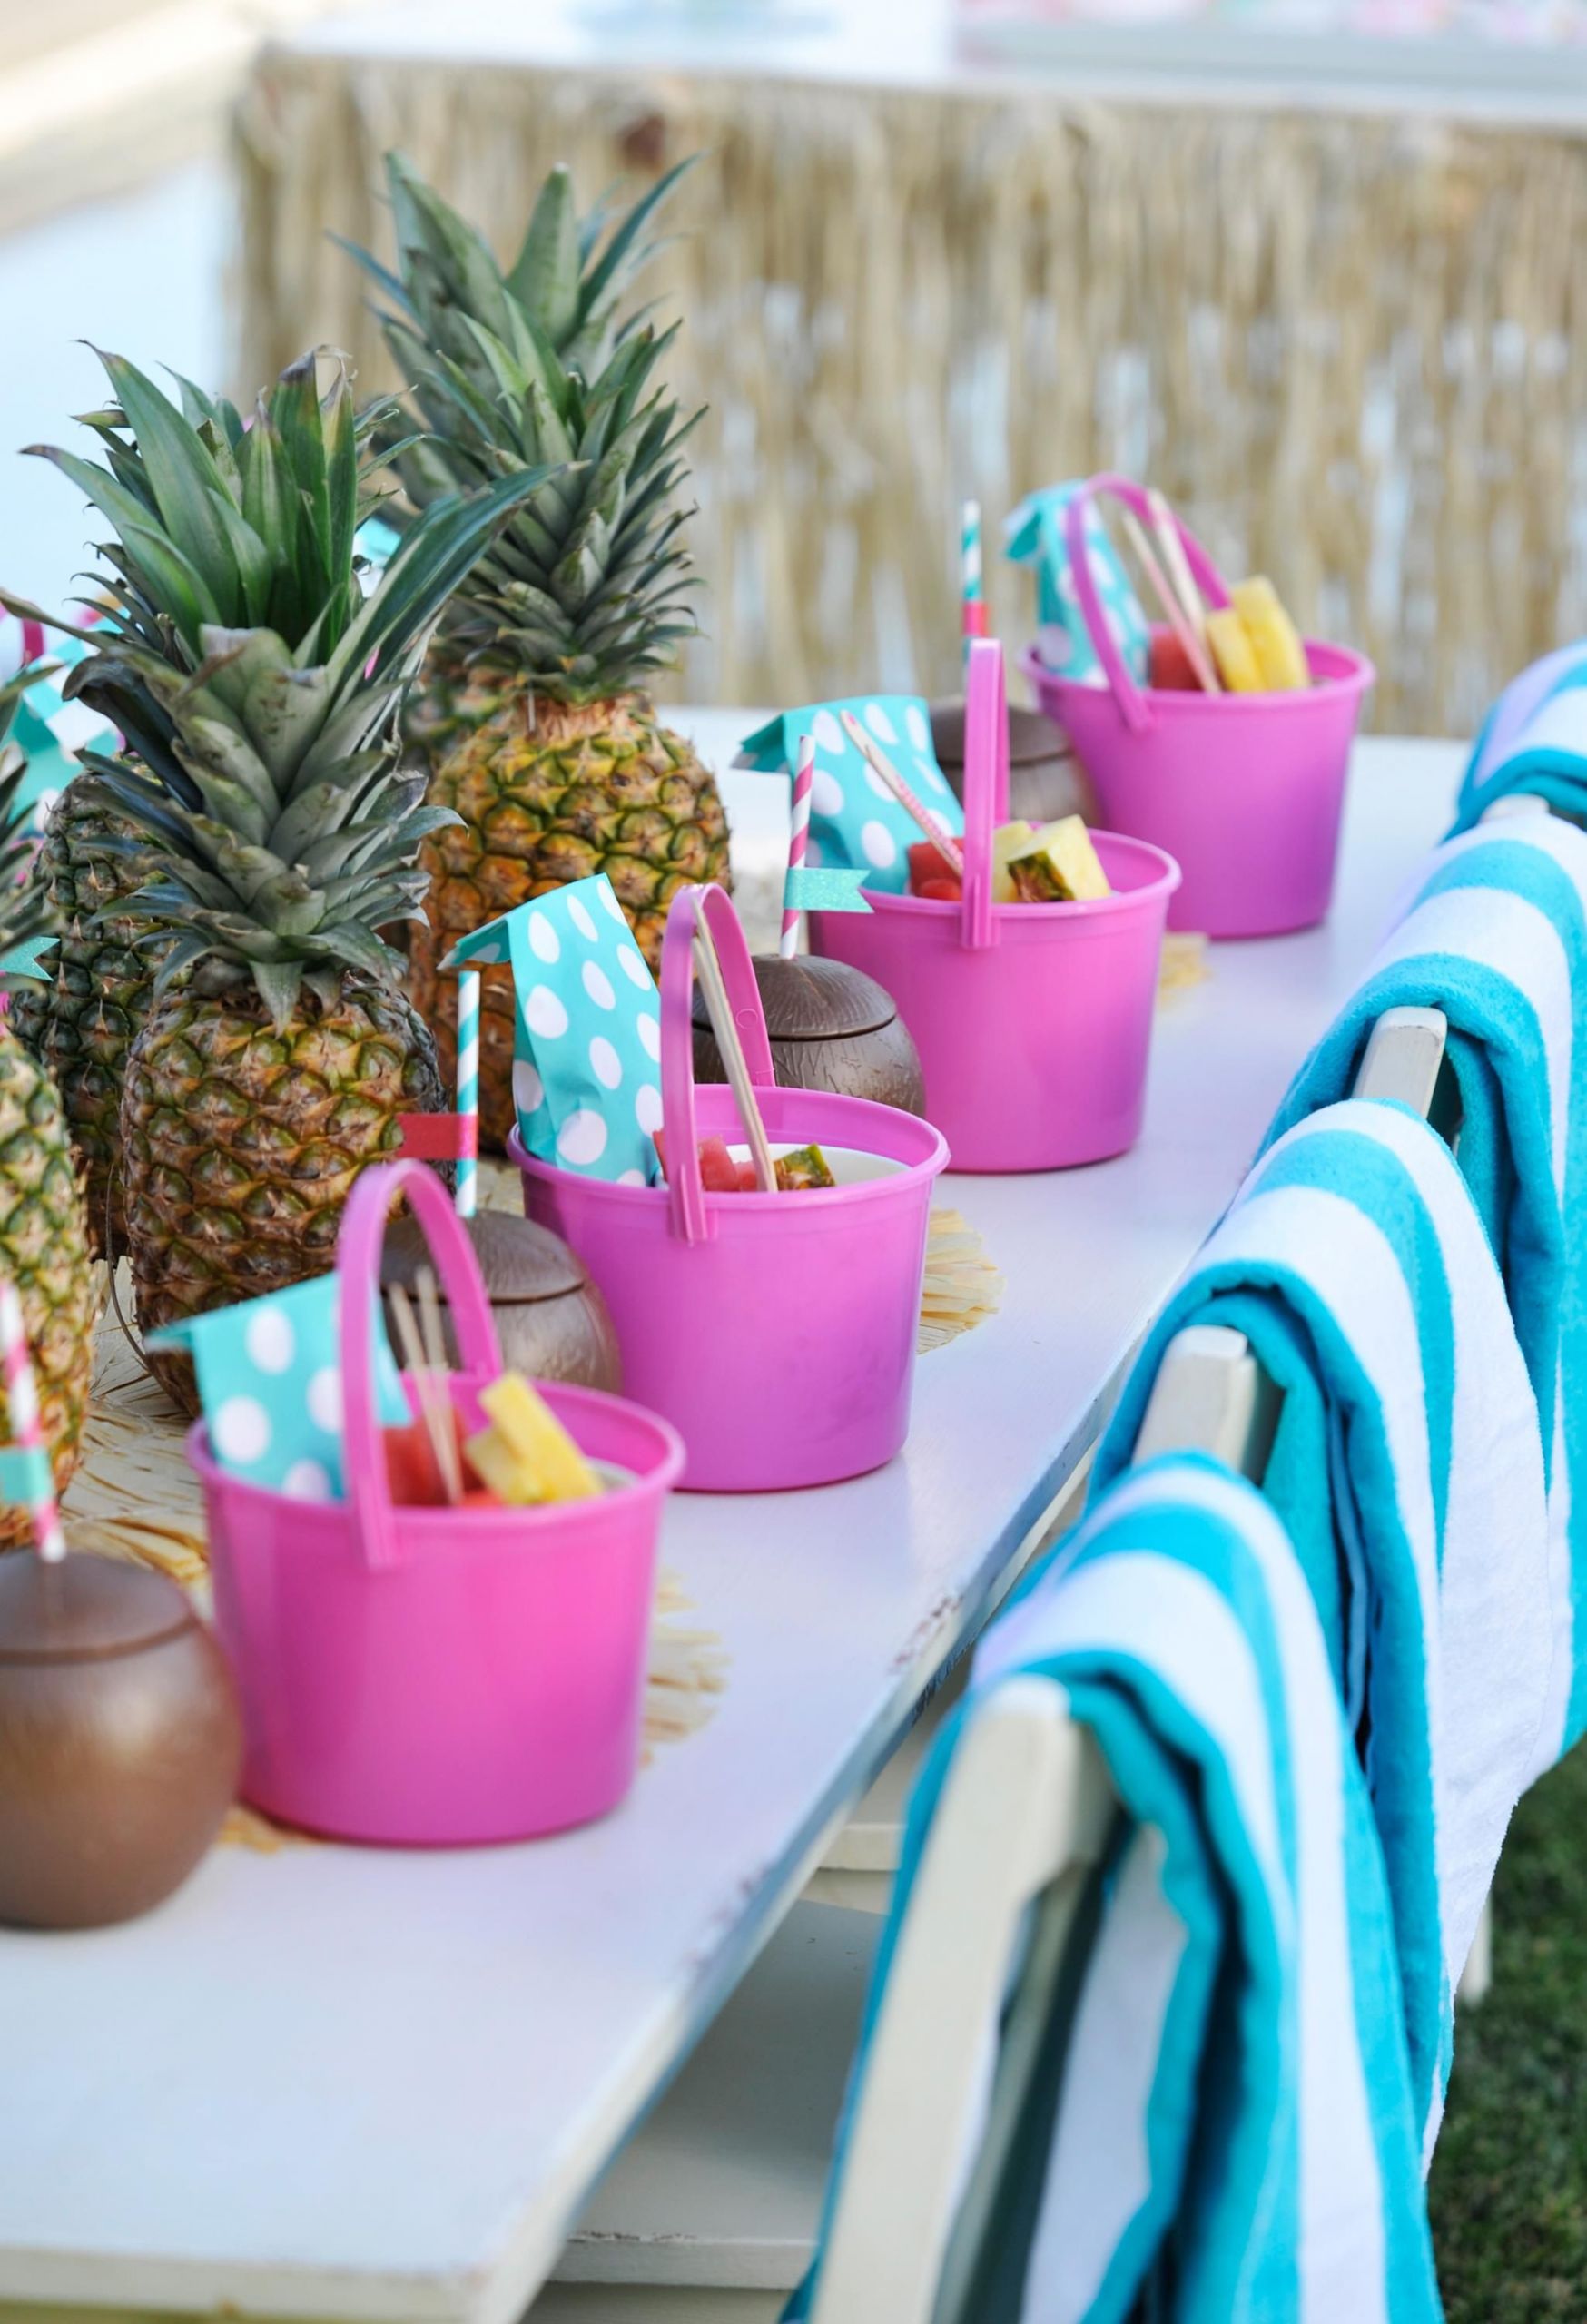 Kids Pool Party Decoration Ideas
 Kids Pool Party Table with Pineapple Centerpieces